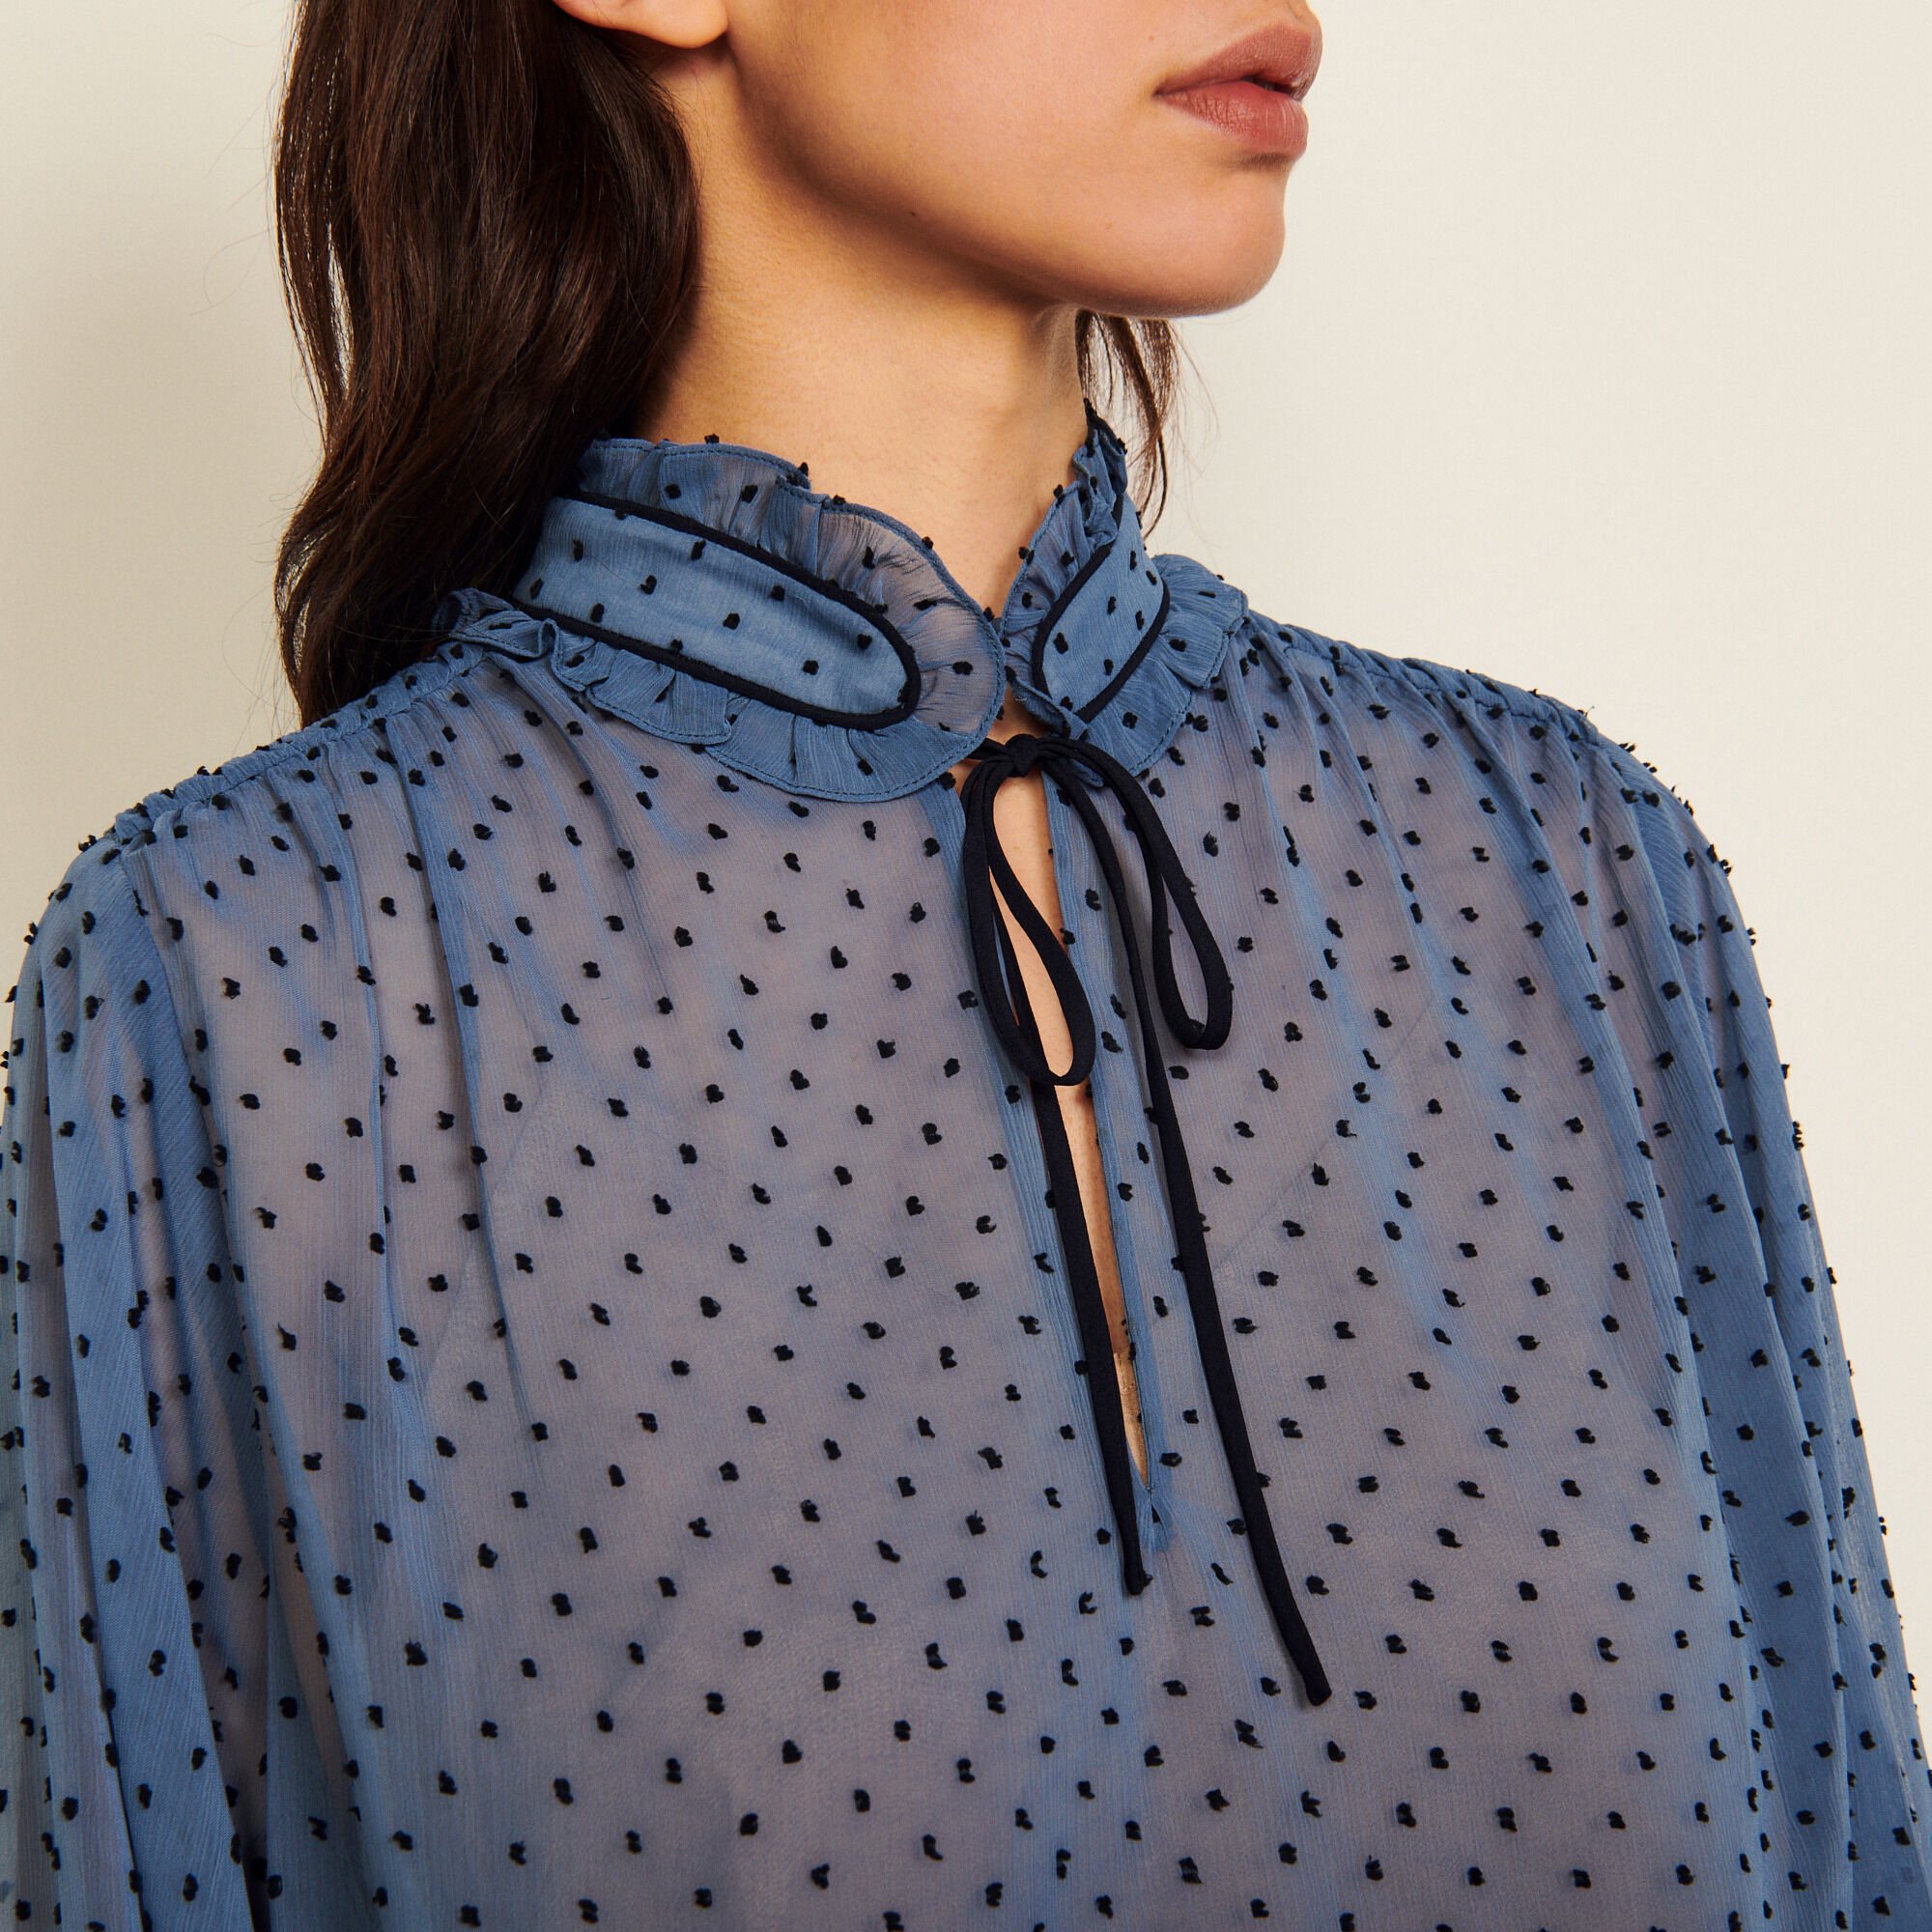 Dotted Swiss high-neck top Select a size and Login to add to Wish list